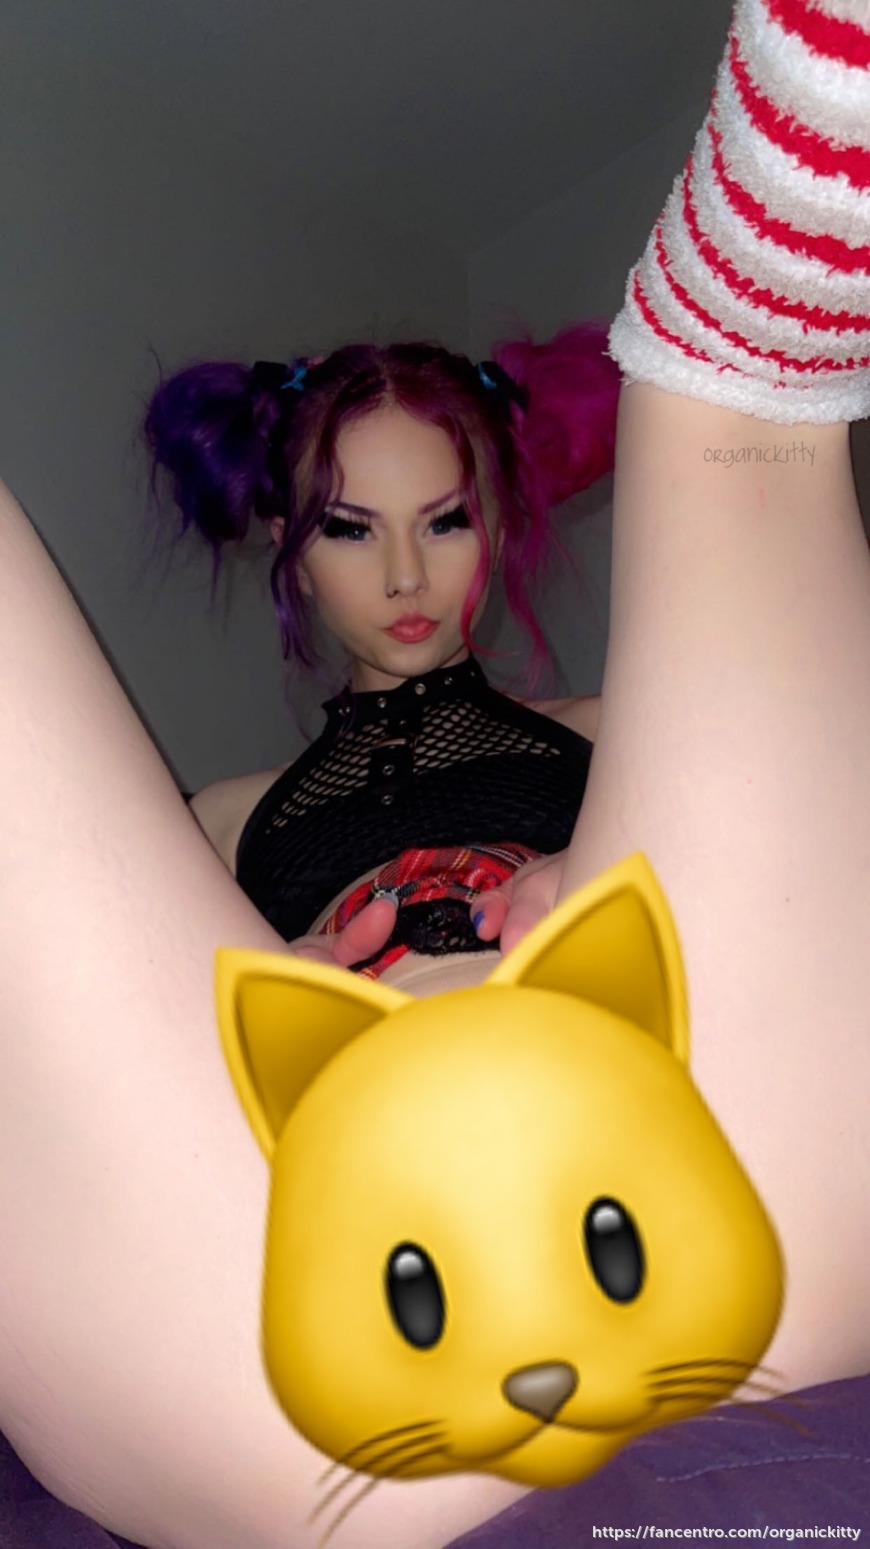 Spreading my pretty pussy for you 😘